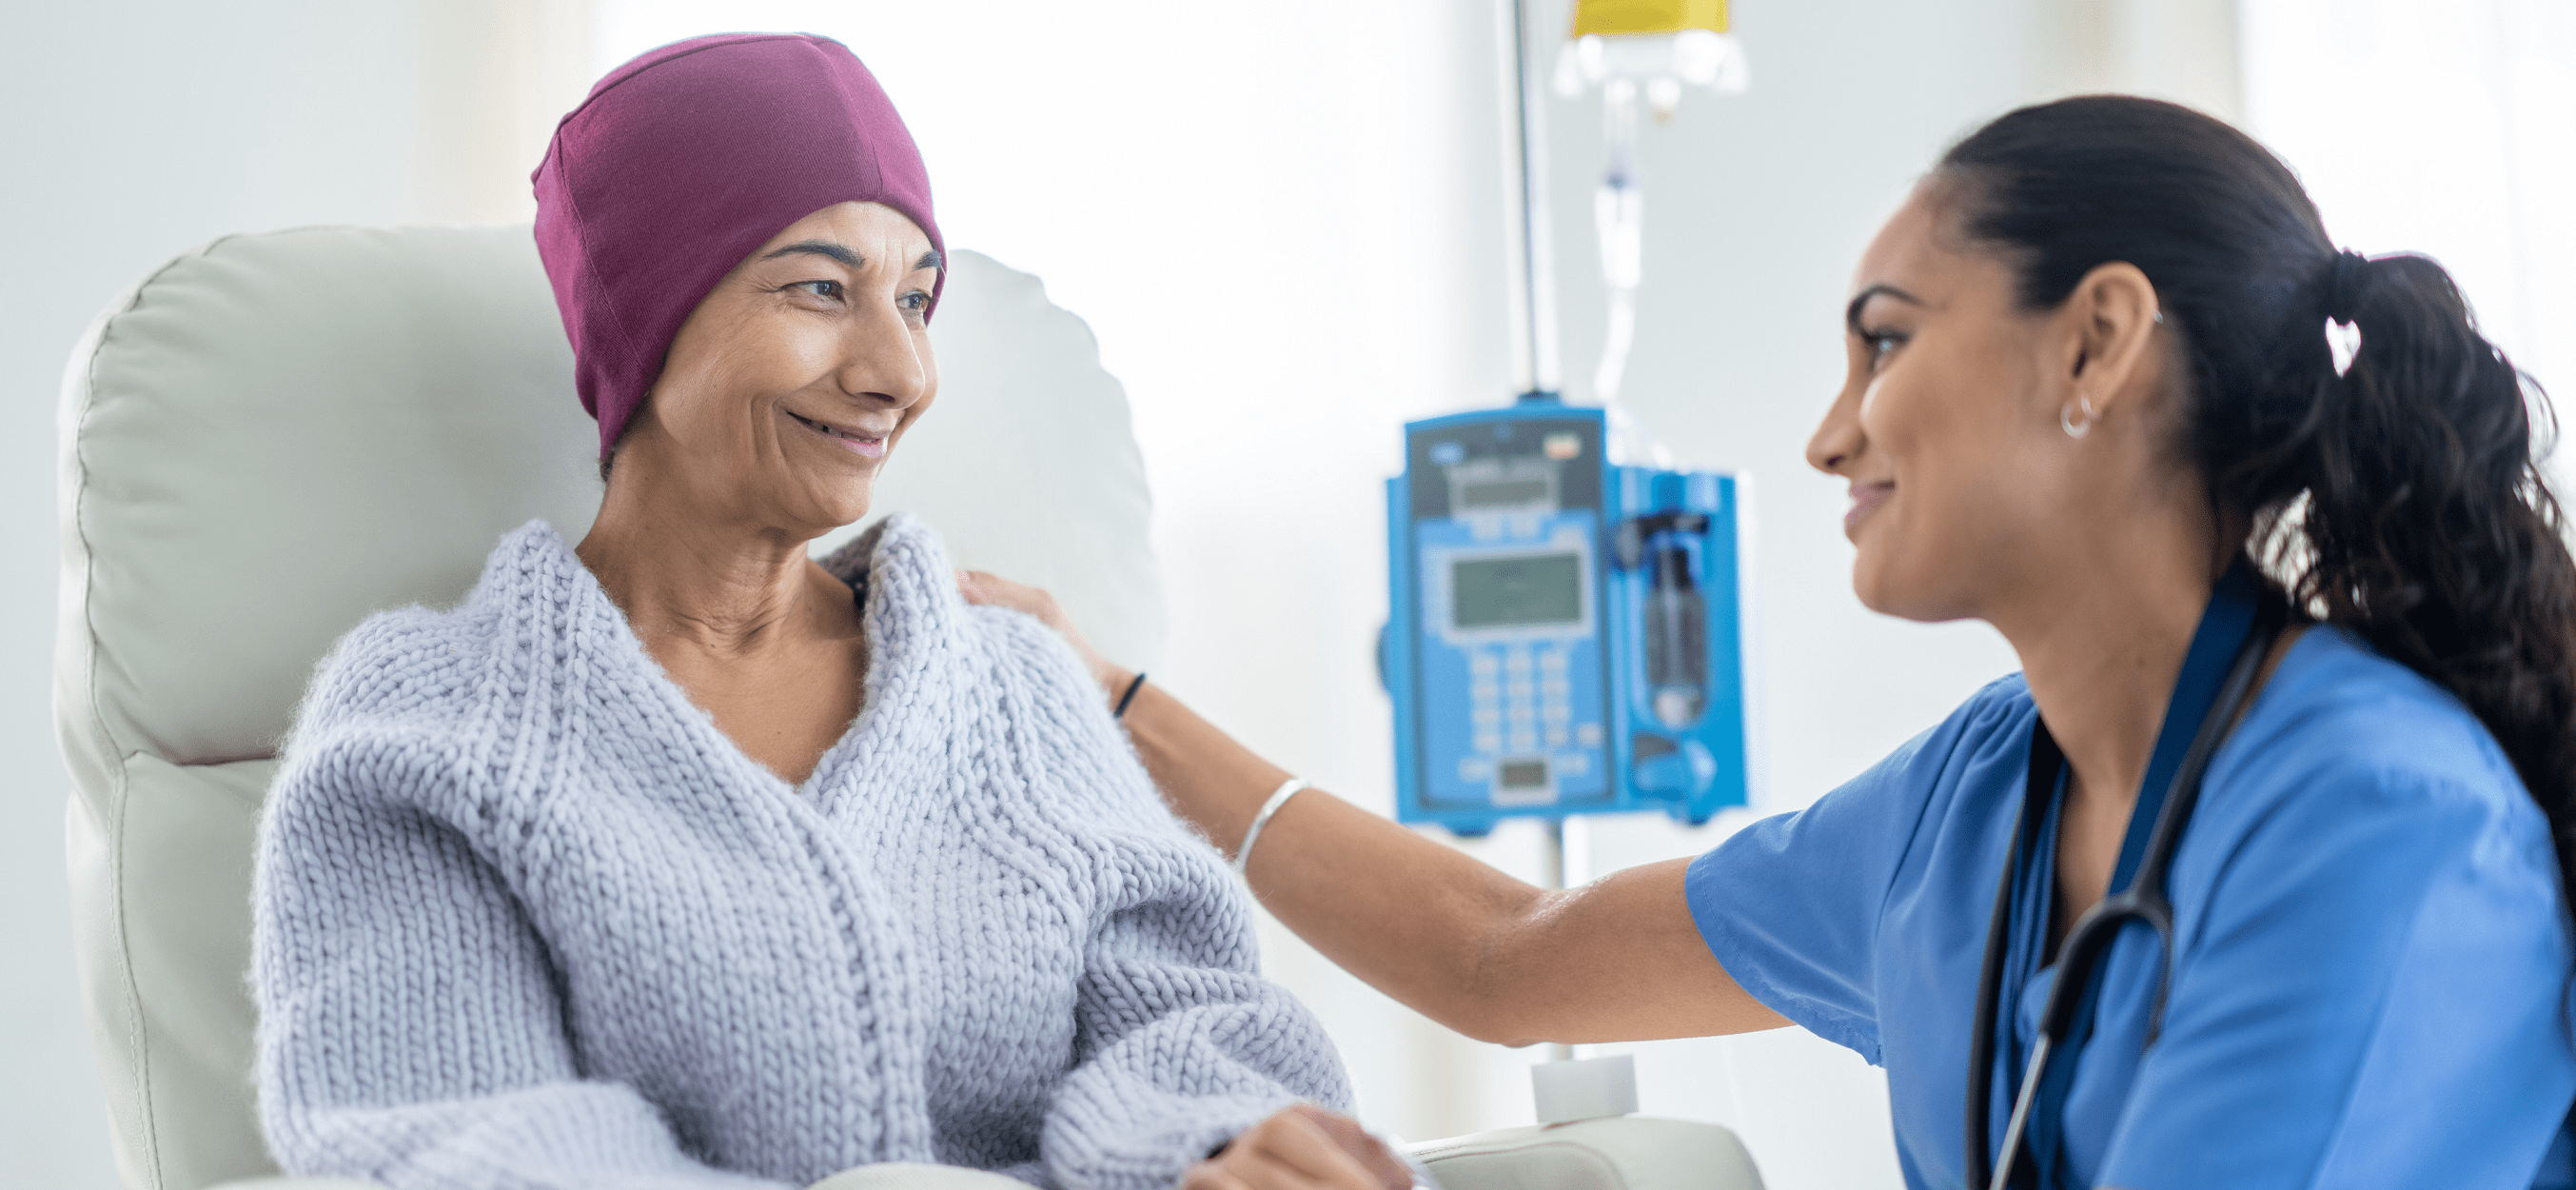 A young female cancer patient smiles at her nurse while receiving a transfusion.